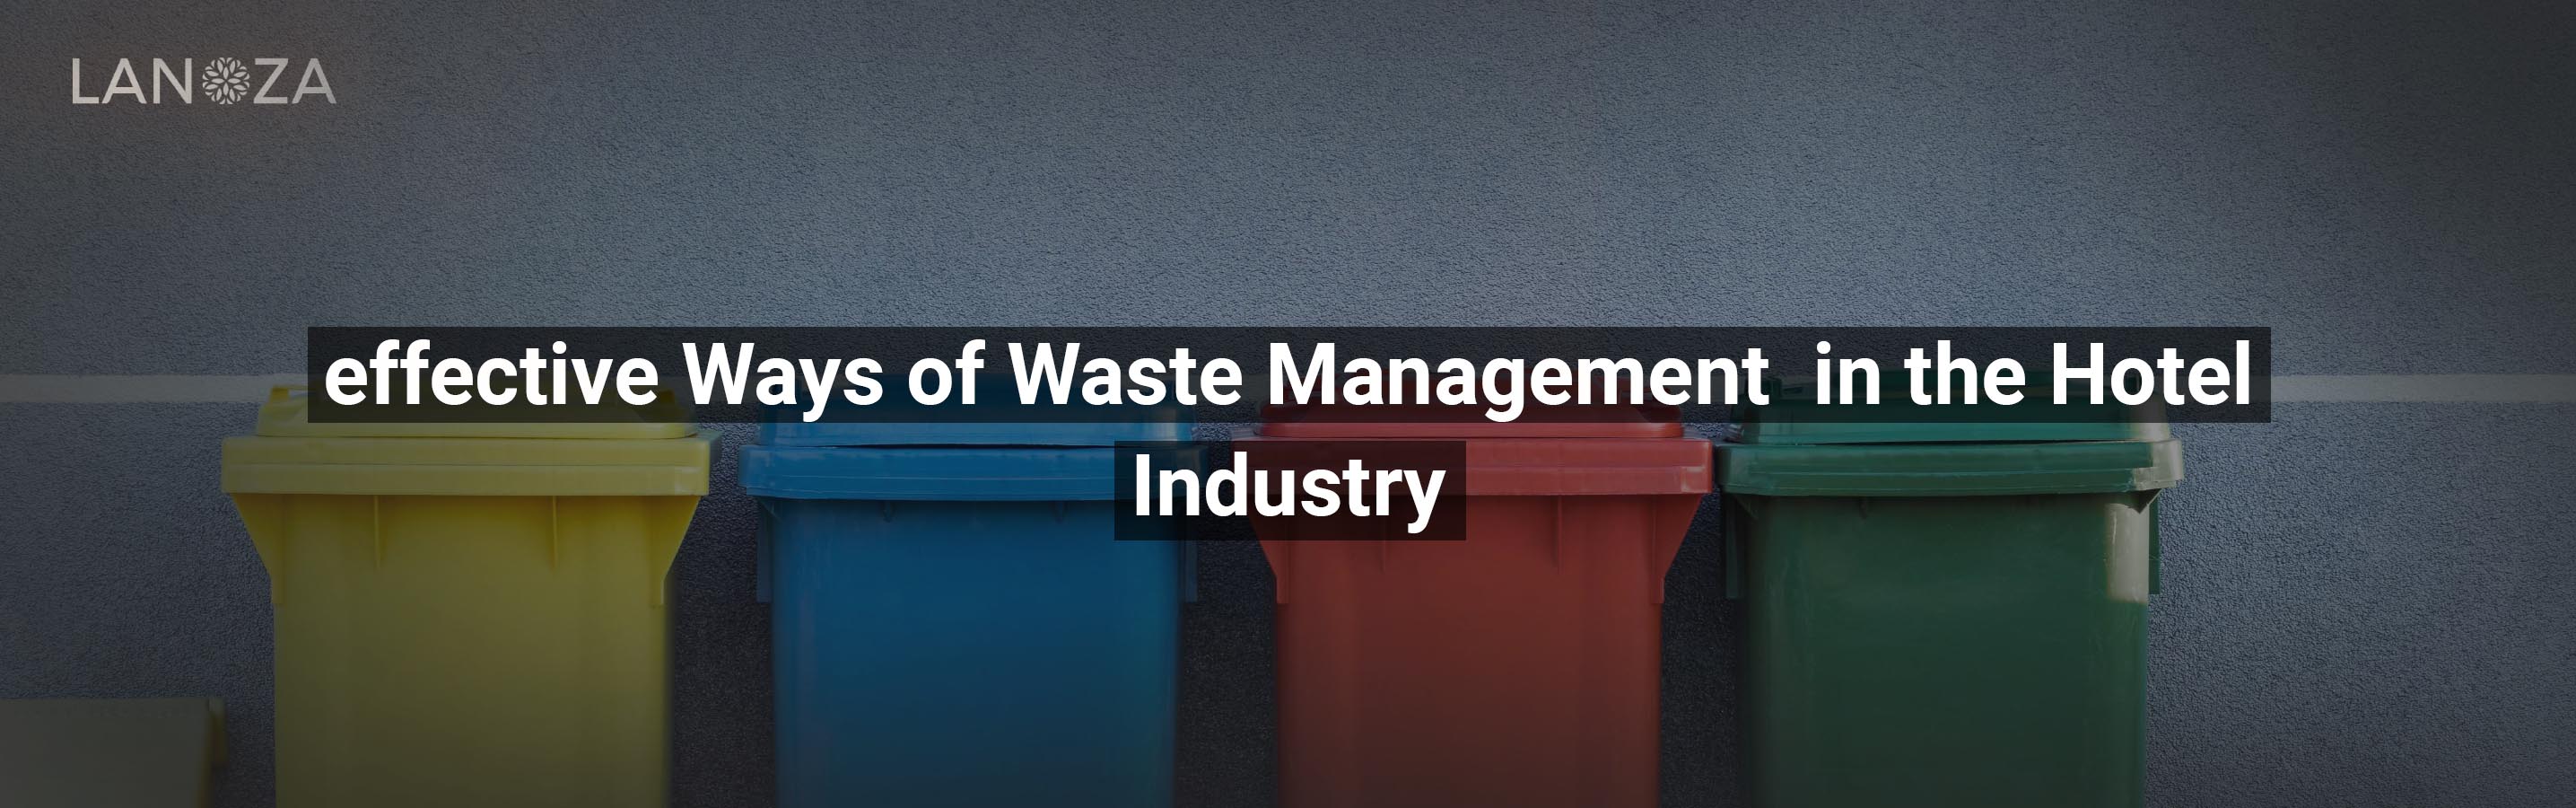 effective-ways-of-waste-management-in-the-hotel-industry